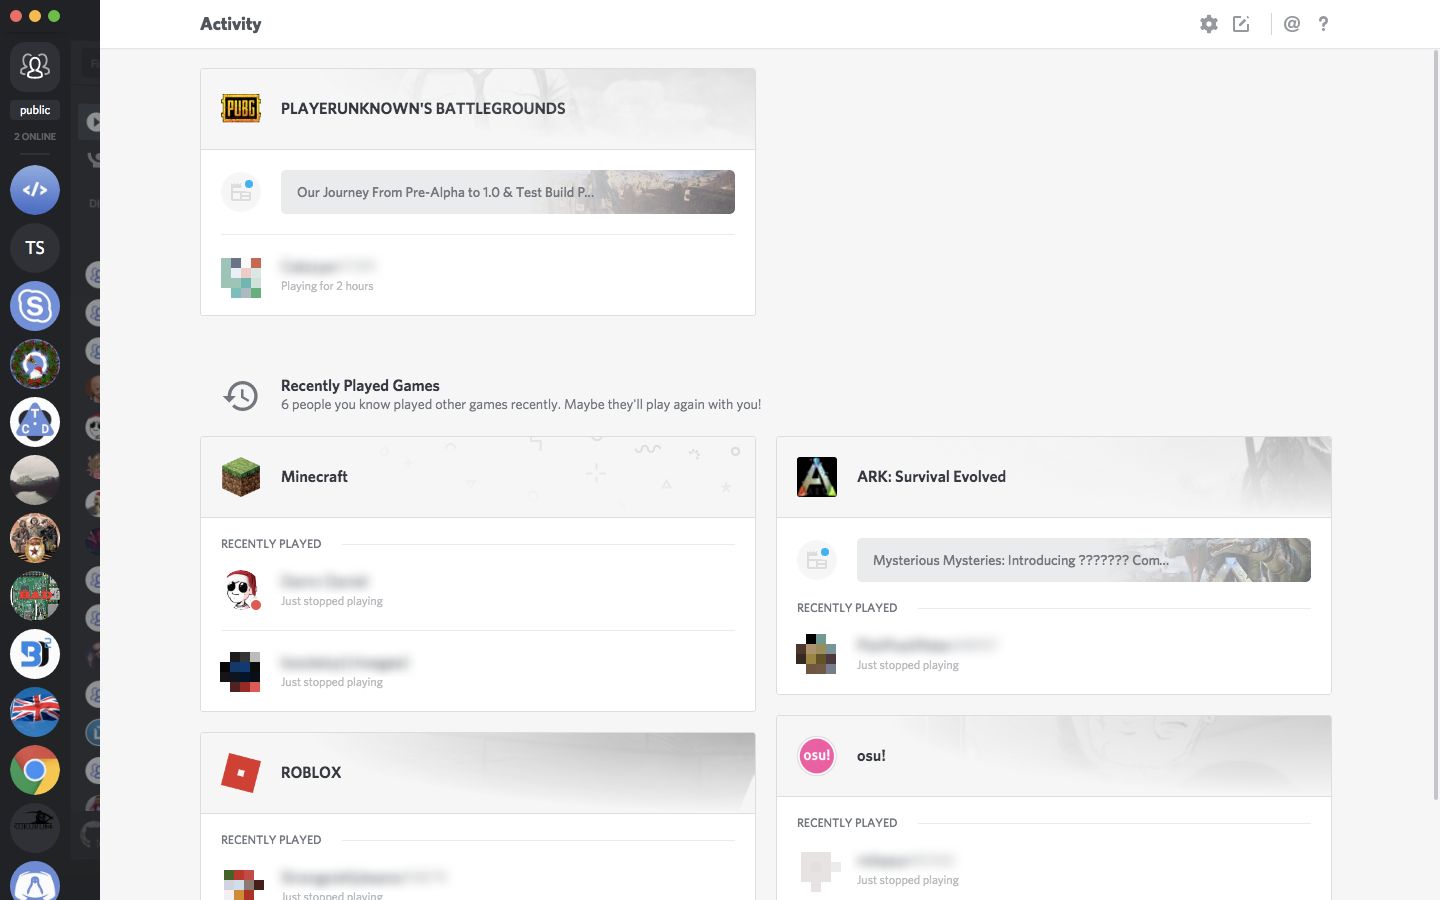 The activity view with the light theme